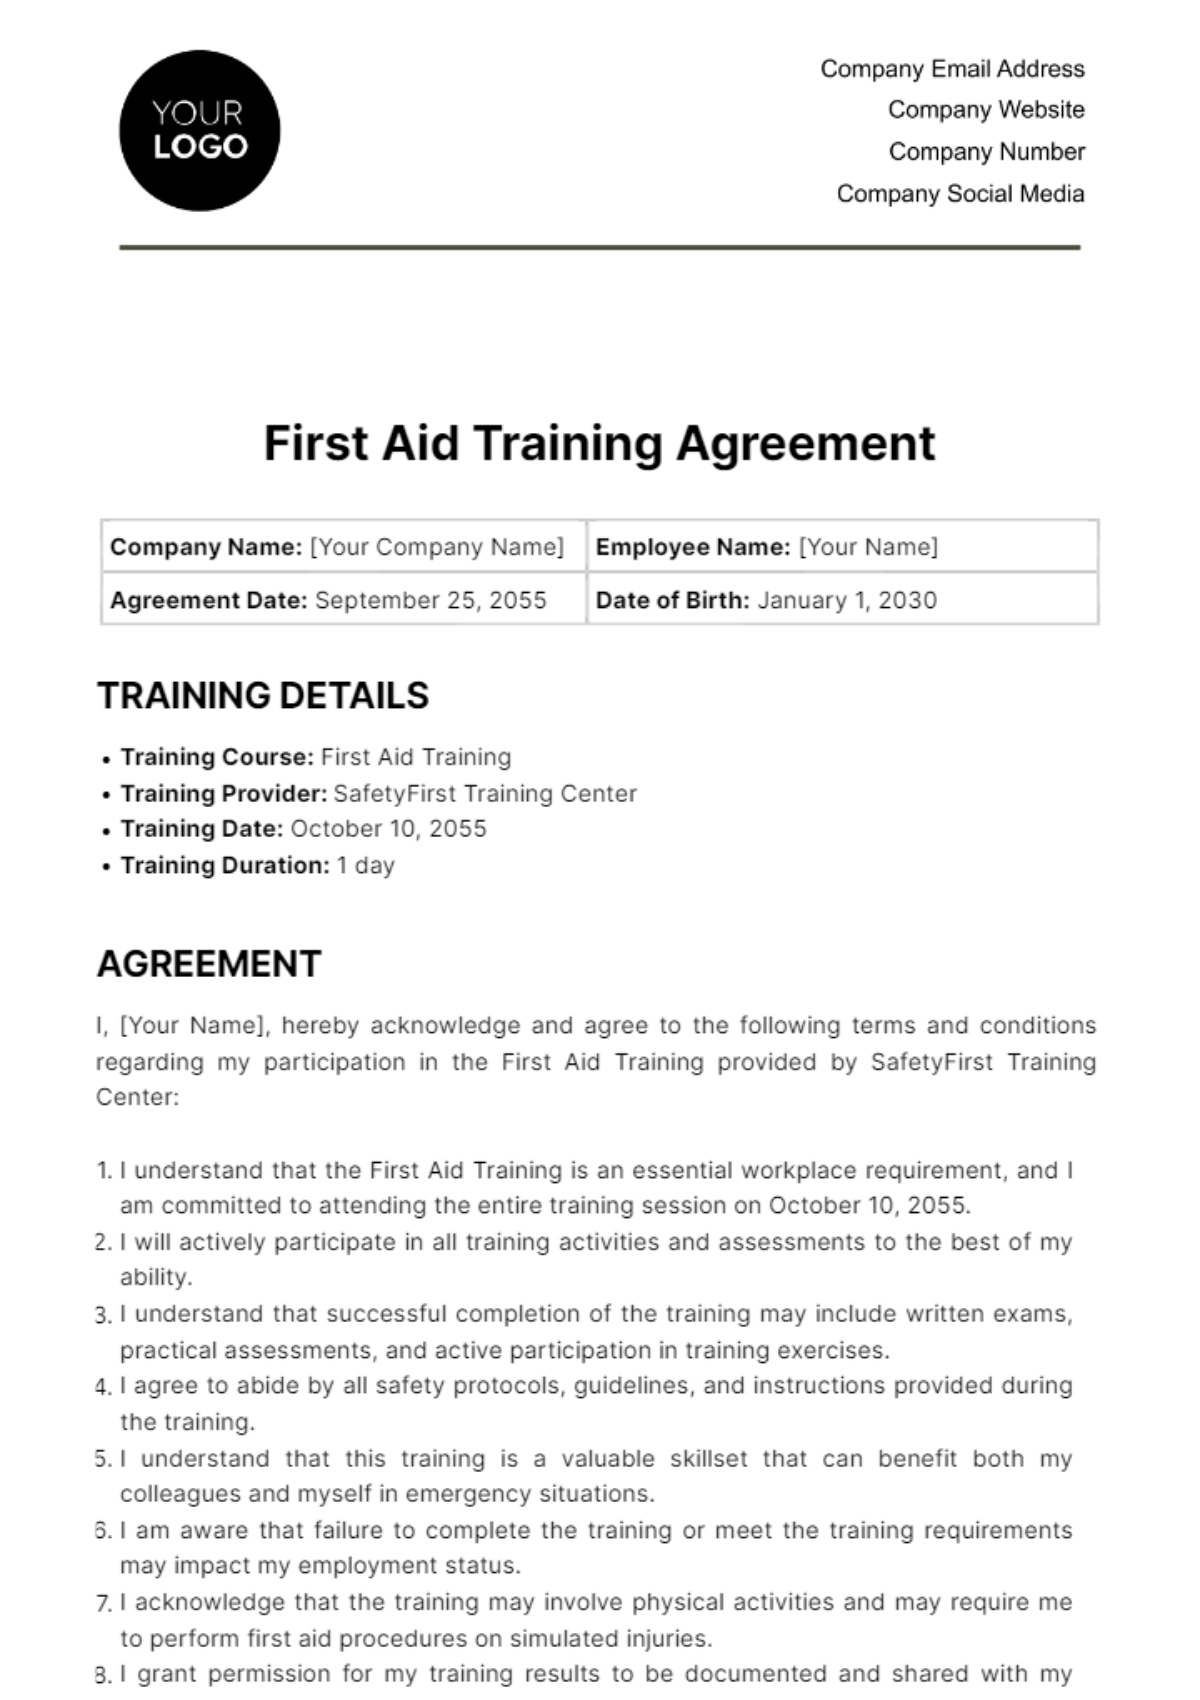 Free First Aid Training Agreement HR Template